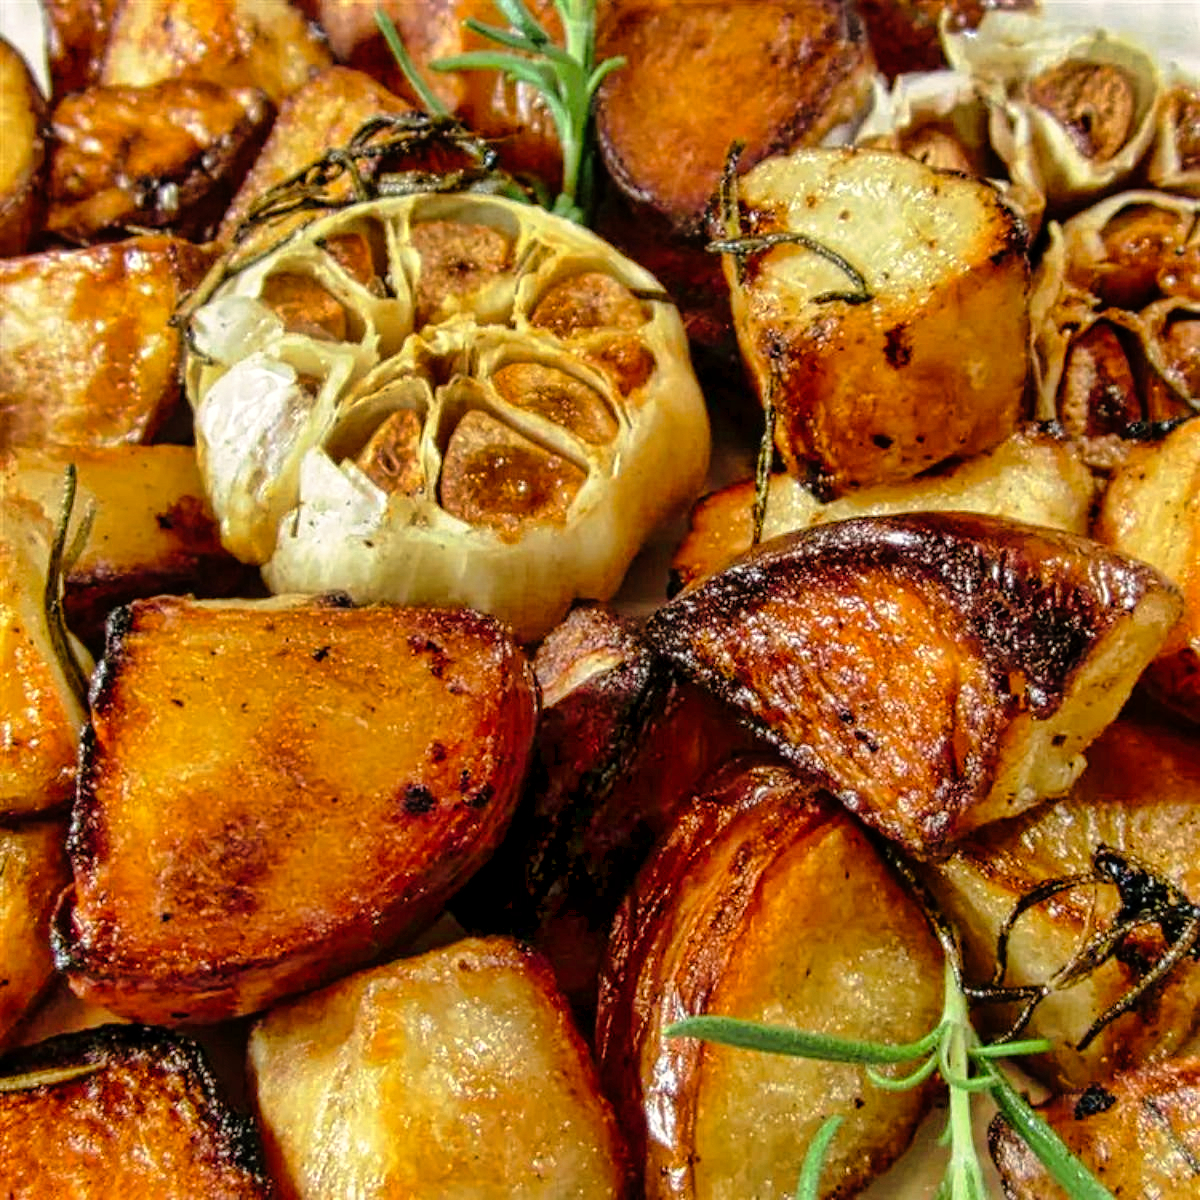 11. Rosemary Potatoes with Roasted Heads of Garlic